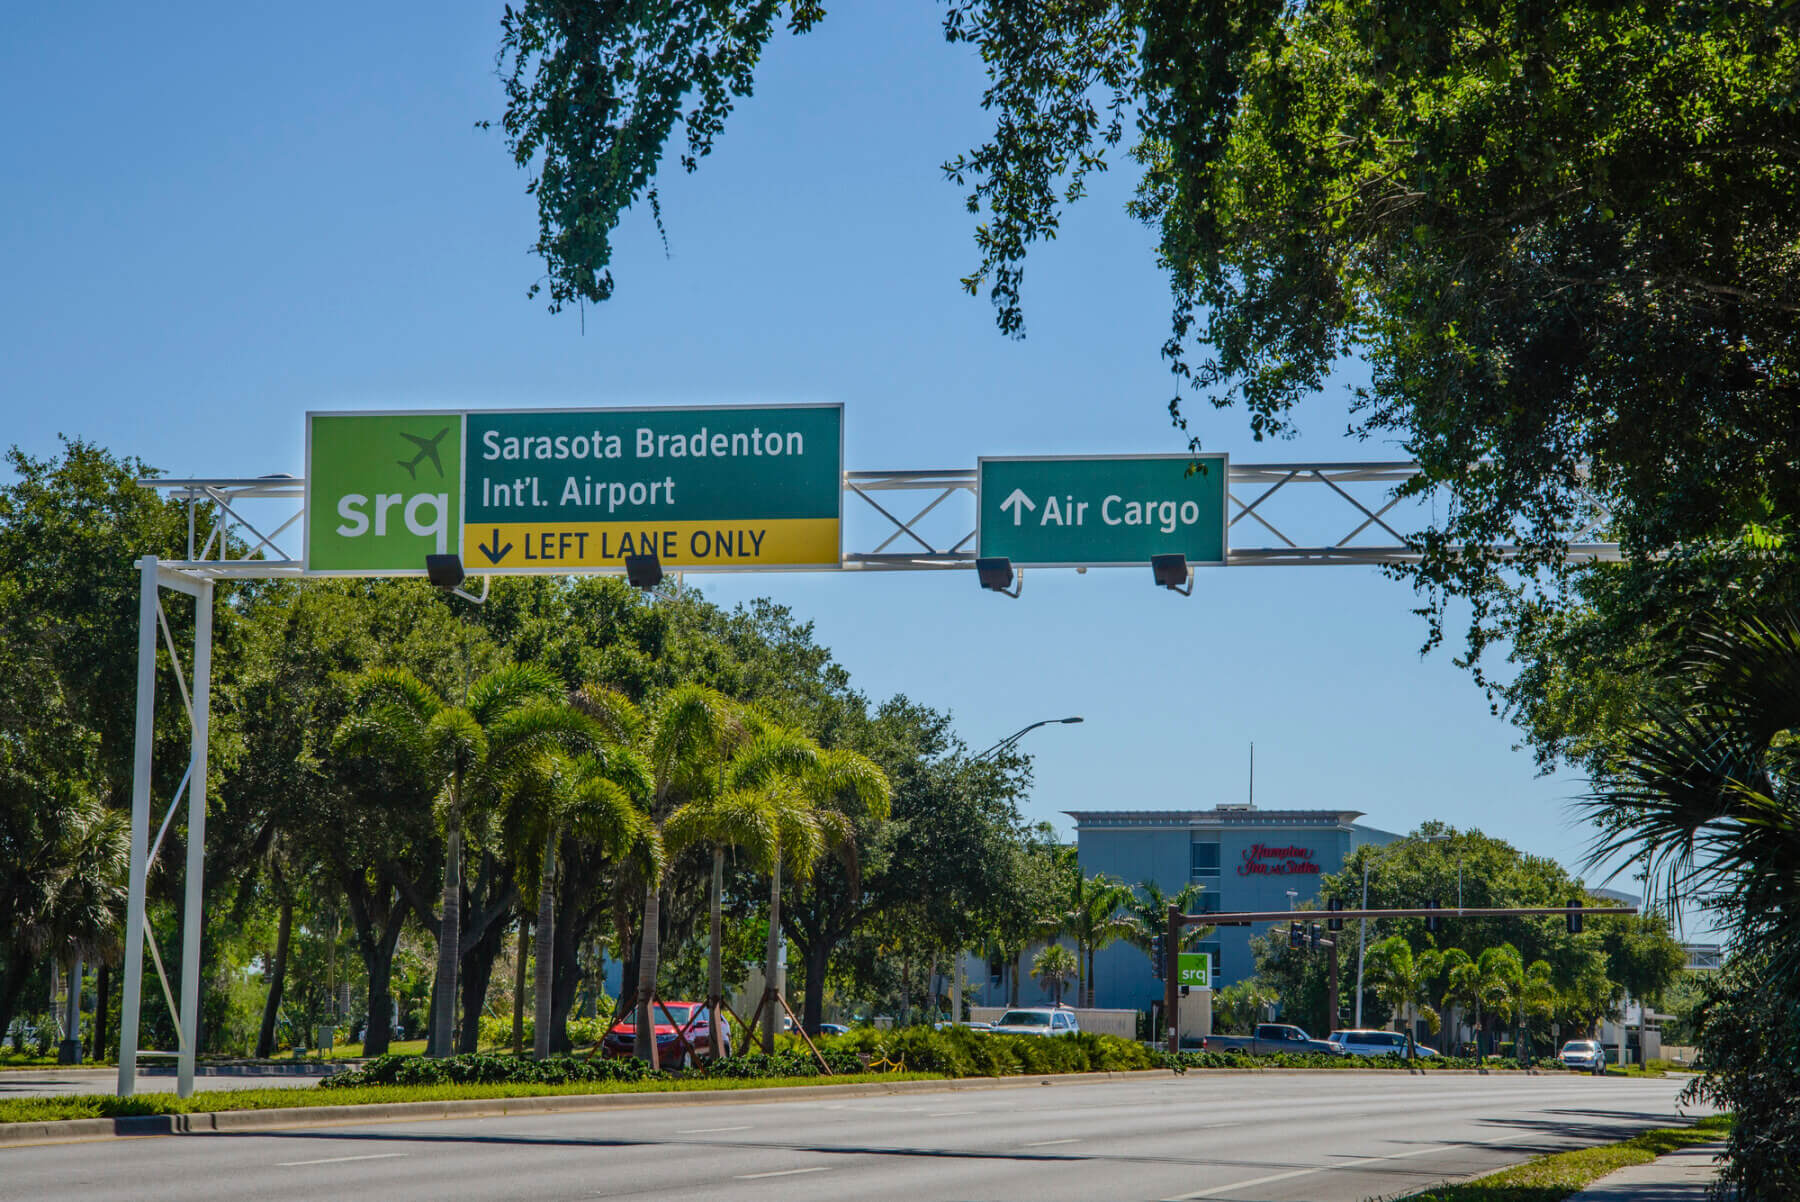 overhead roadway sign directing drivers to the air cargo entrance to Sarasota Bradenton International Airport